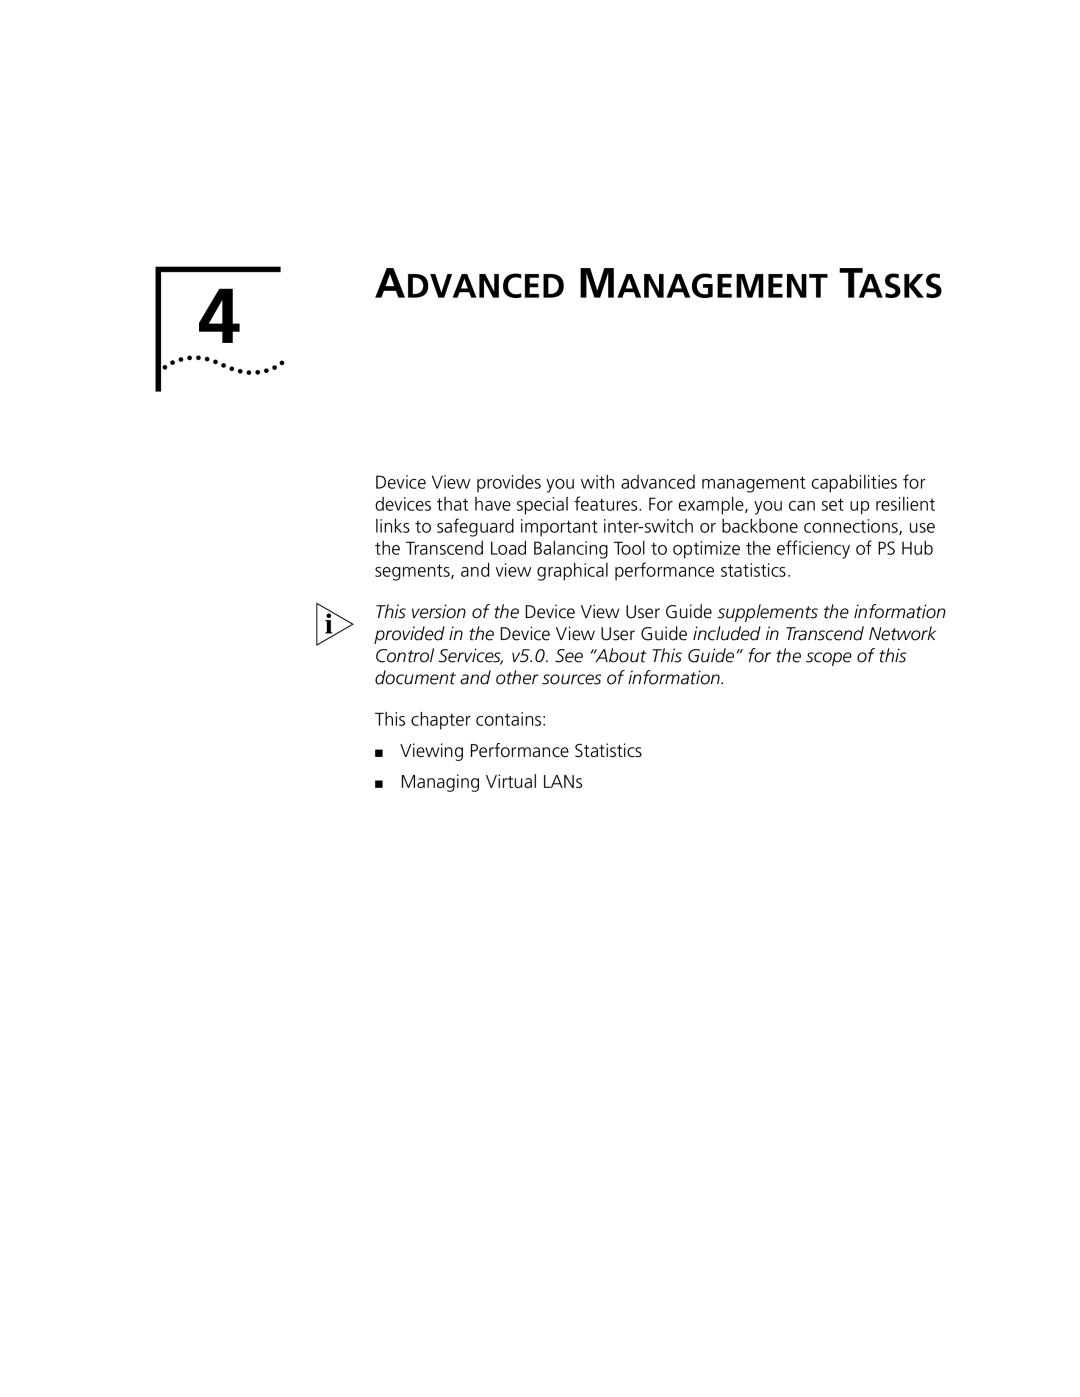 3Com 9000 manual Advanced Management Tasks, This chapter contains Viewing Performance Statistics, Managing Virtual LANs 